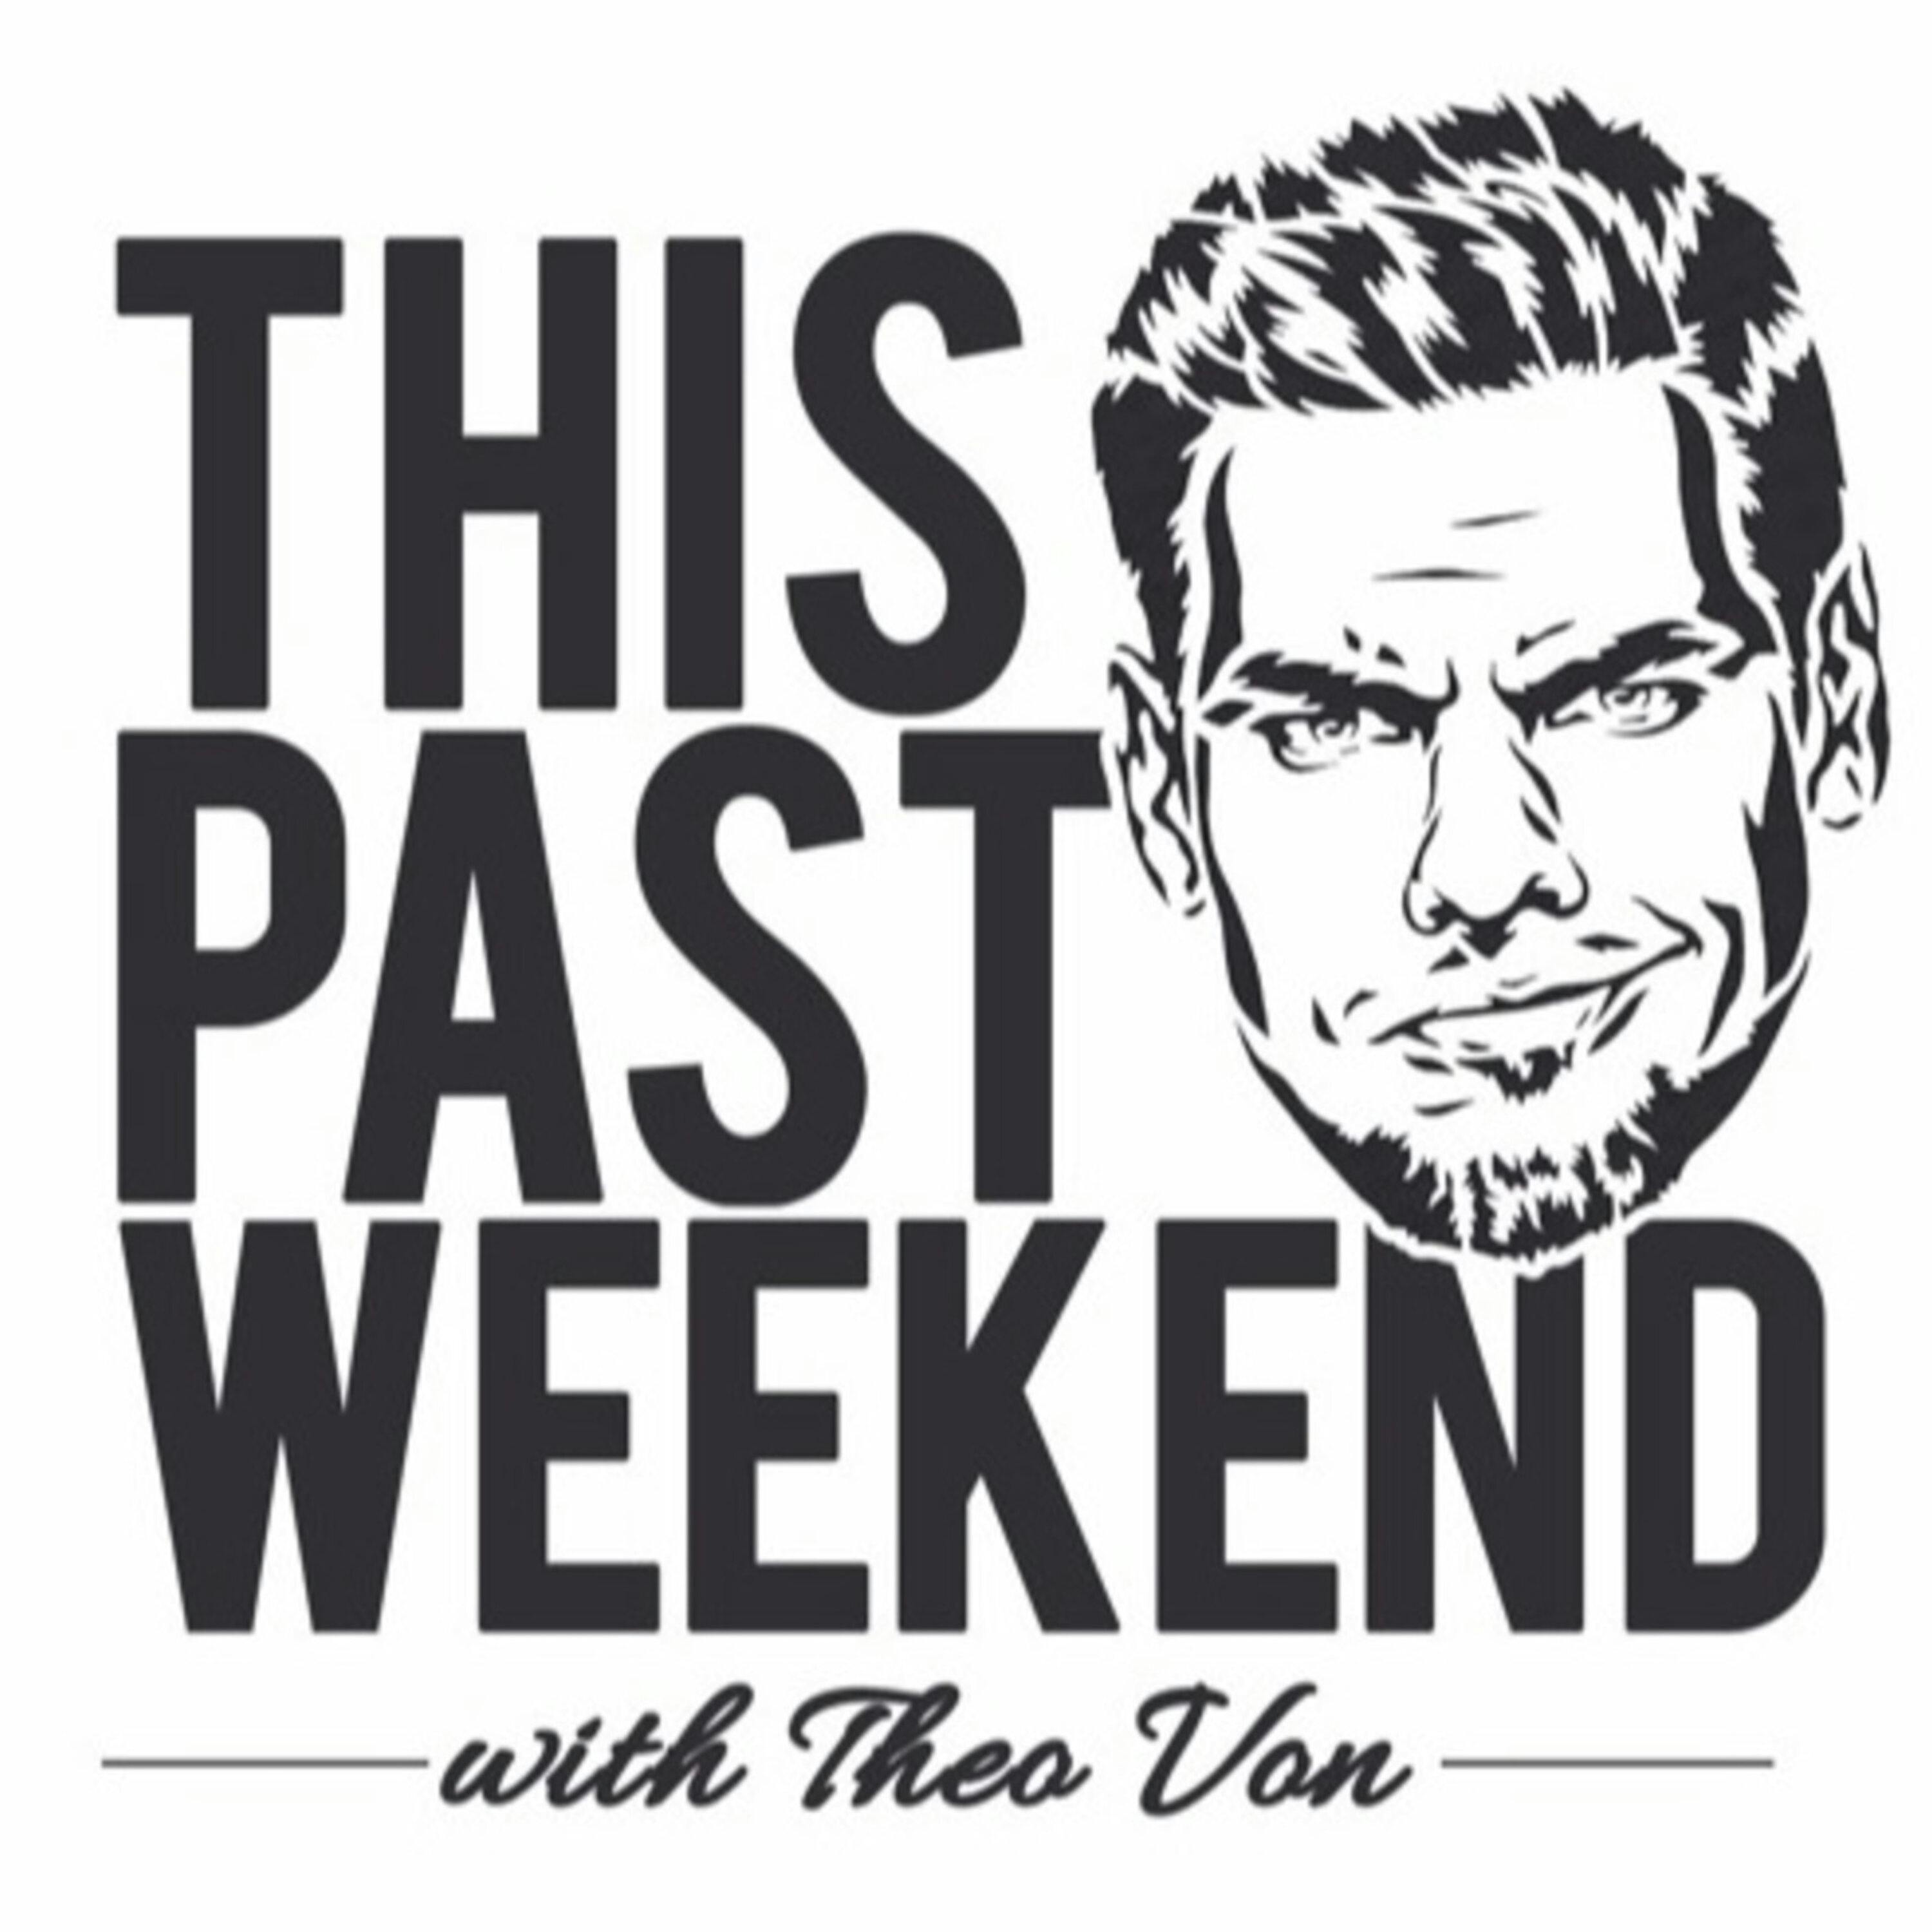 10-16-17 | This Past Weekend #46 by Theo Von